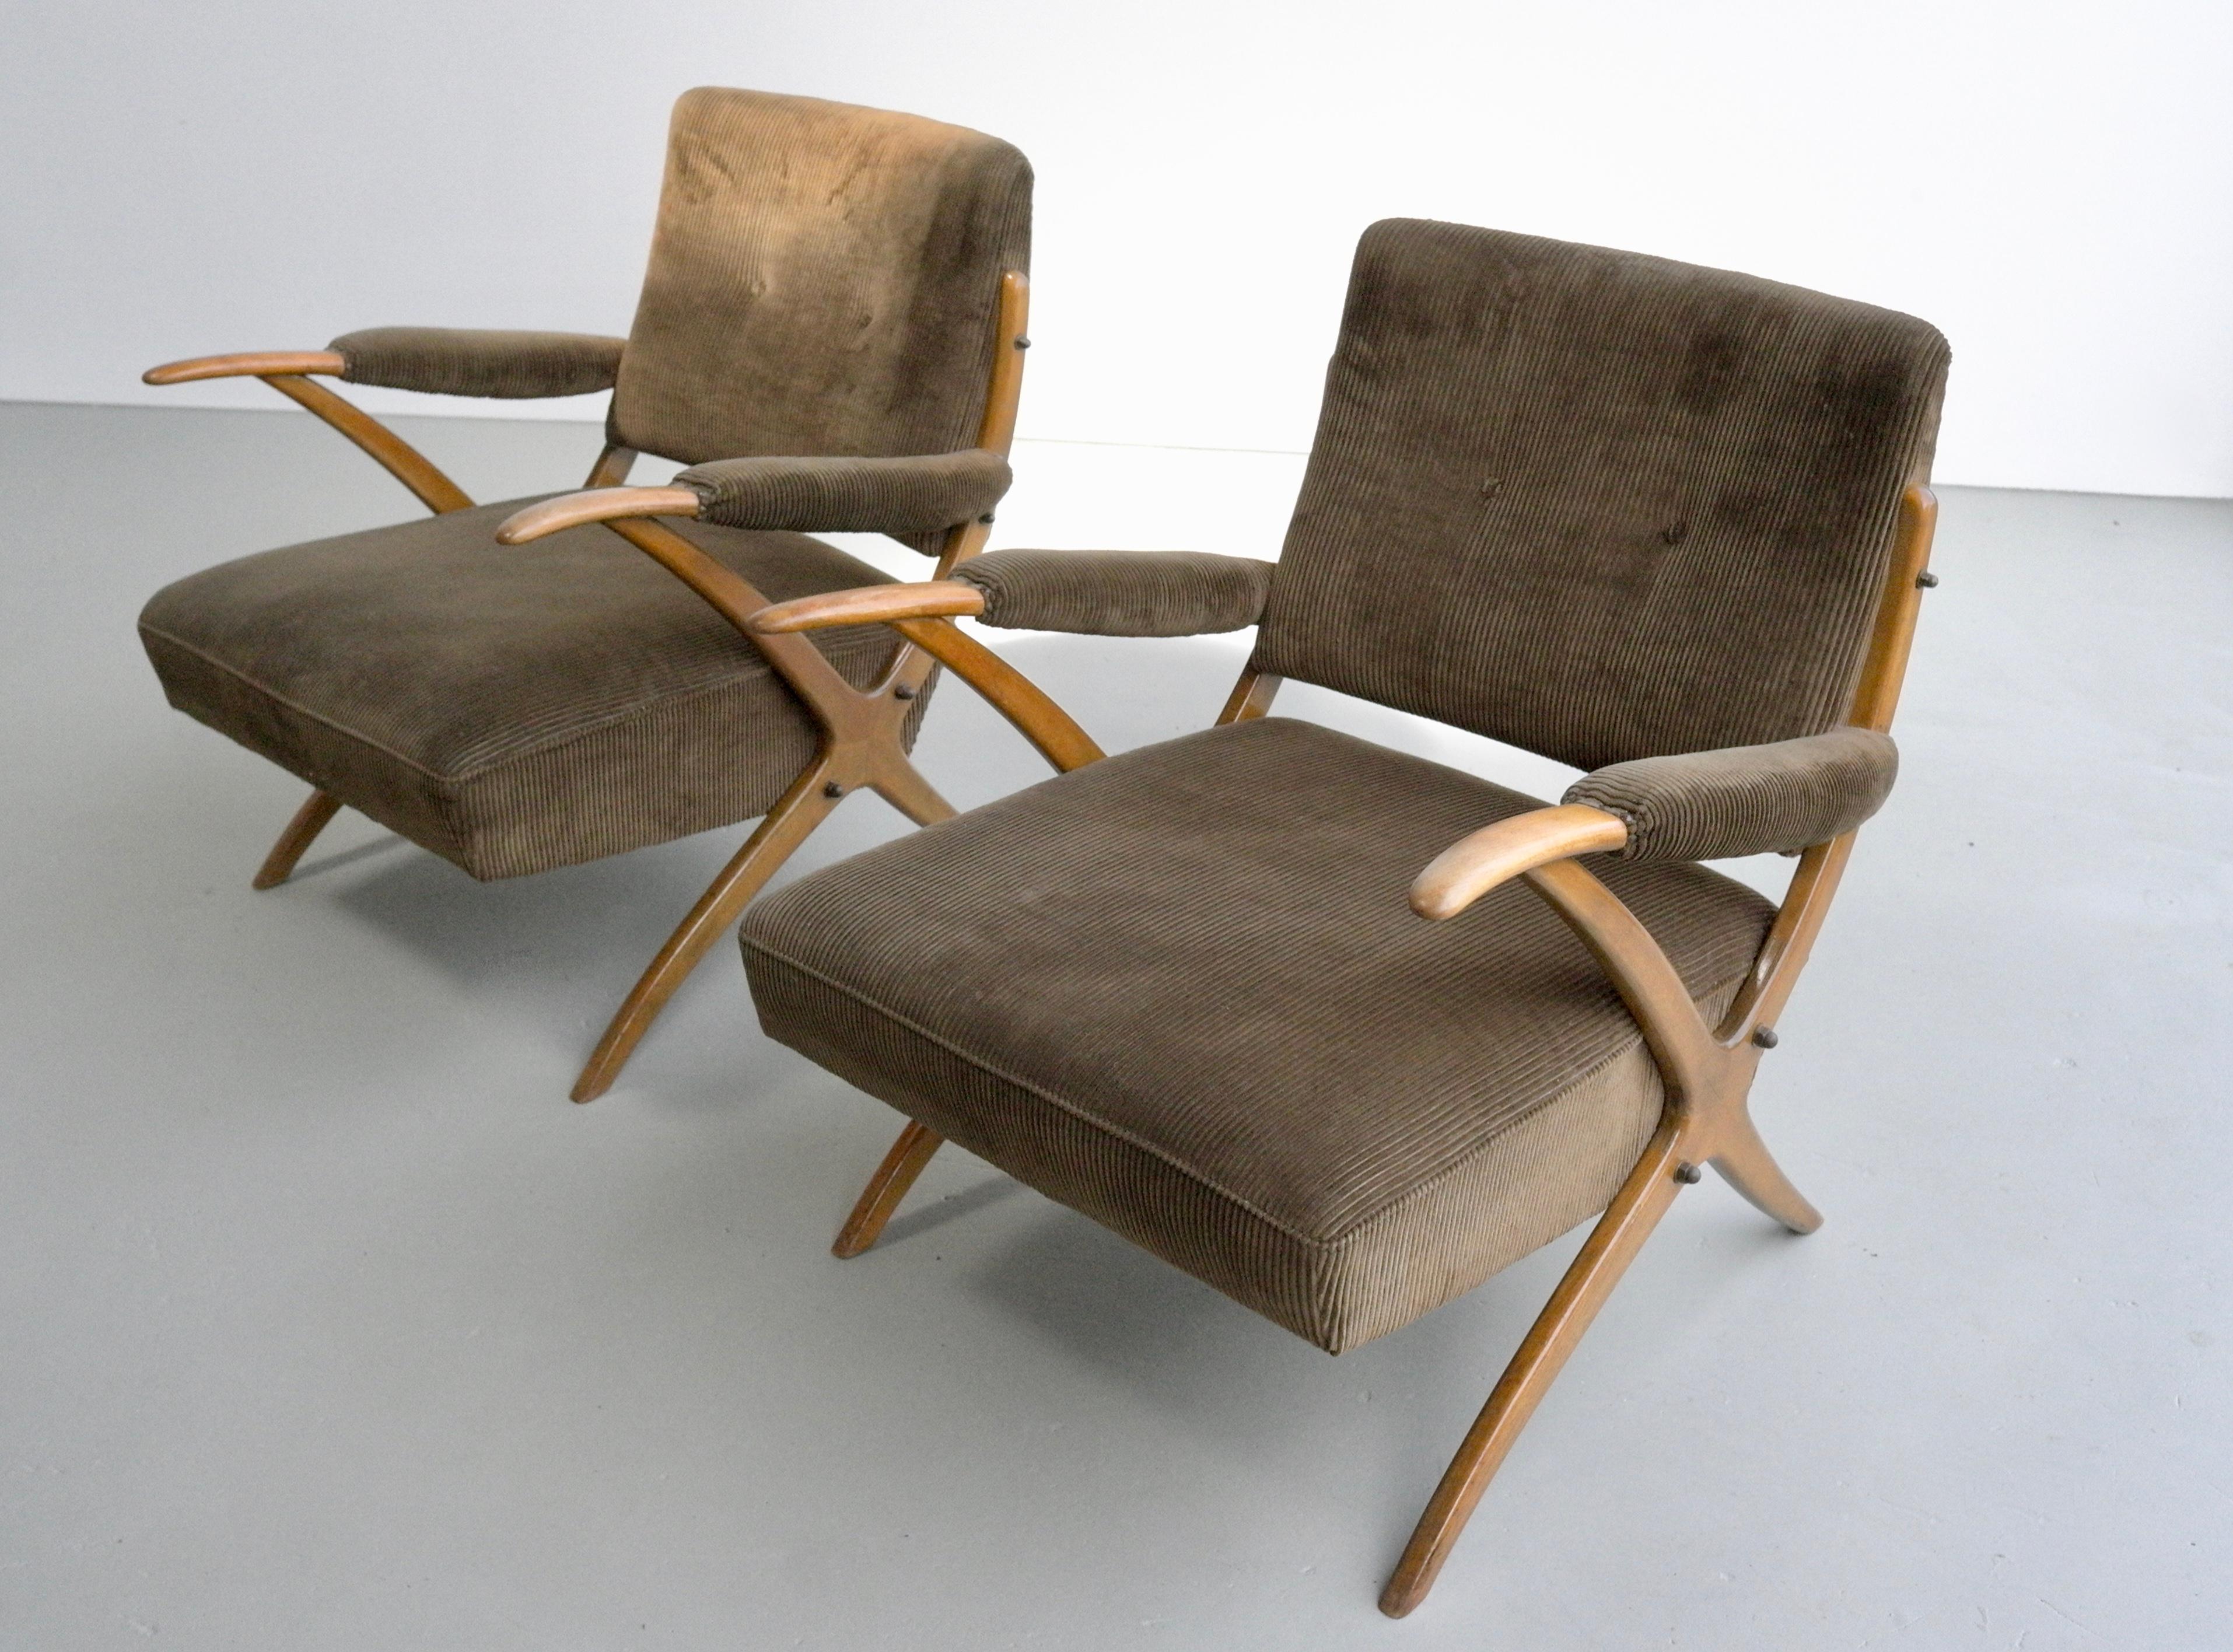 Exceptional Pair of Wooden Curved Cross-Frame Lounge Chairs, Italy, 1950s 4